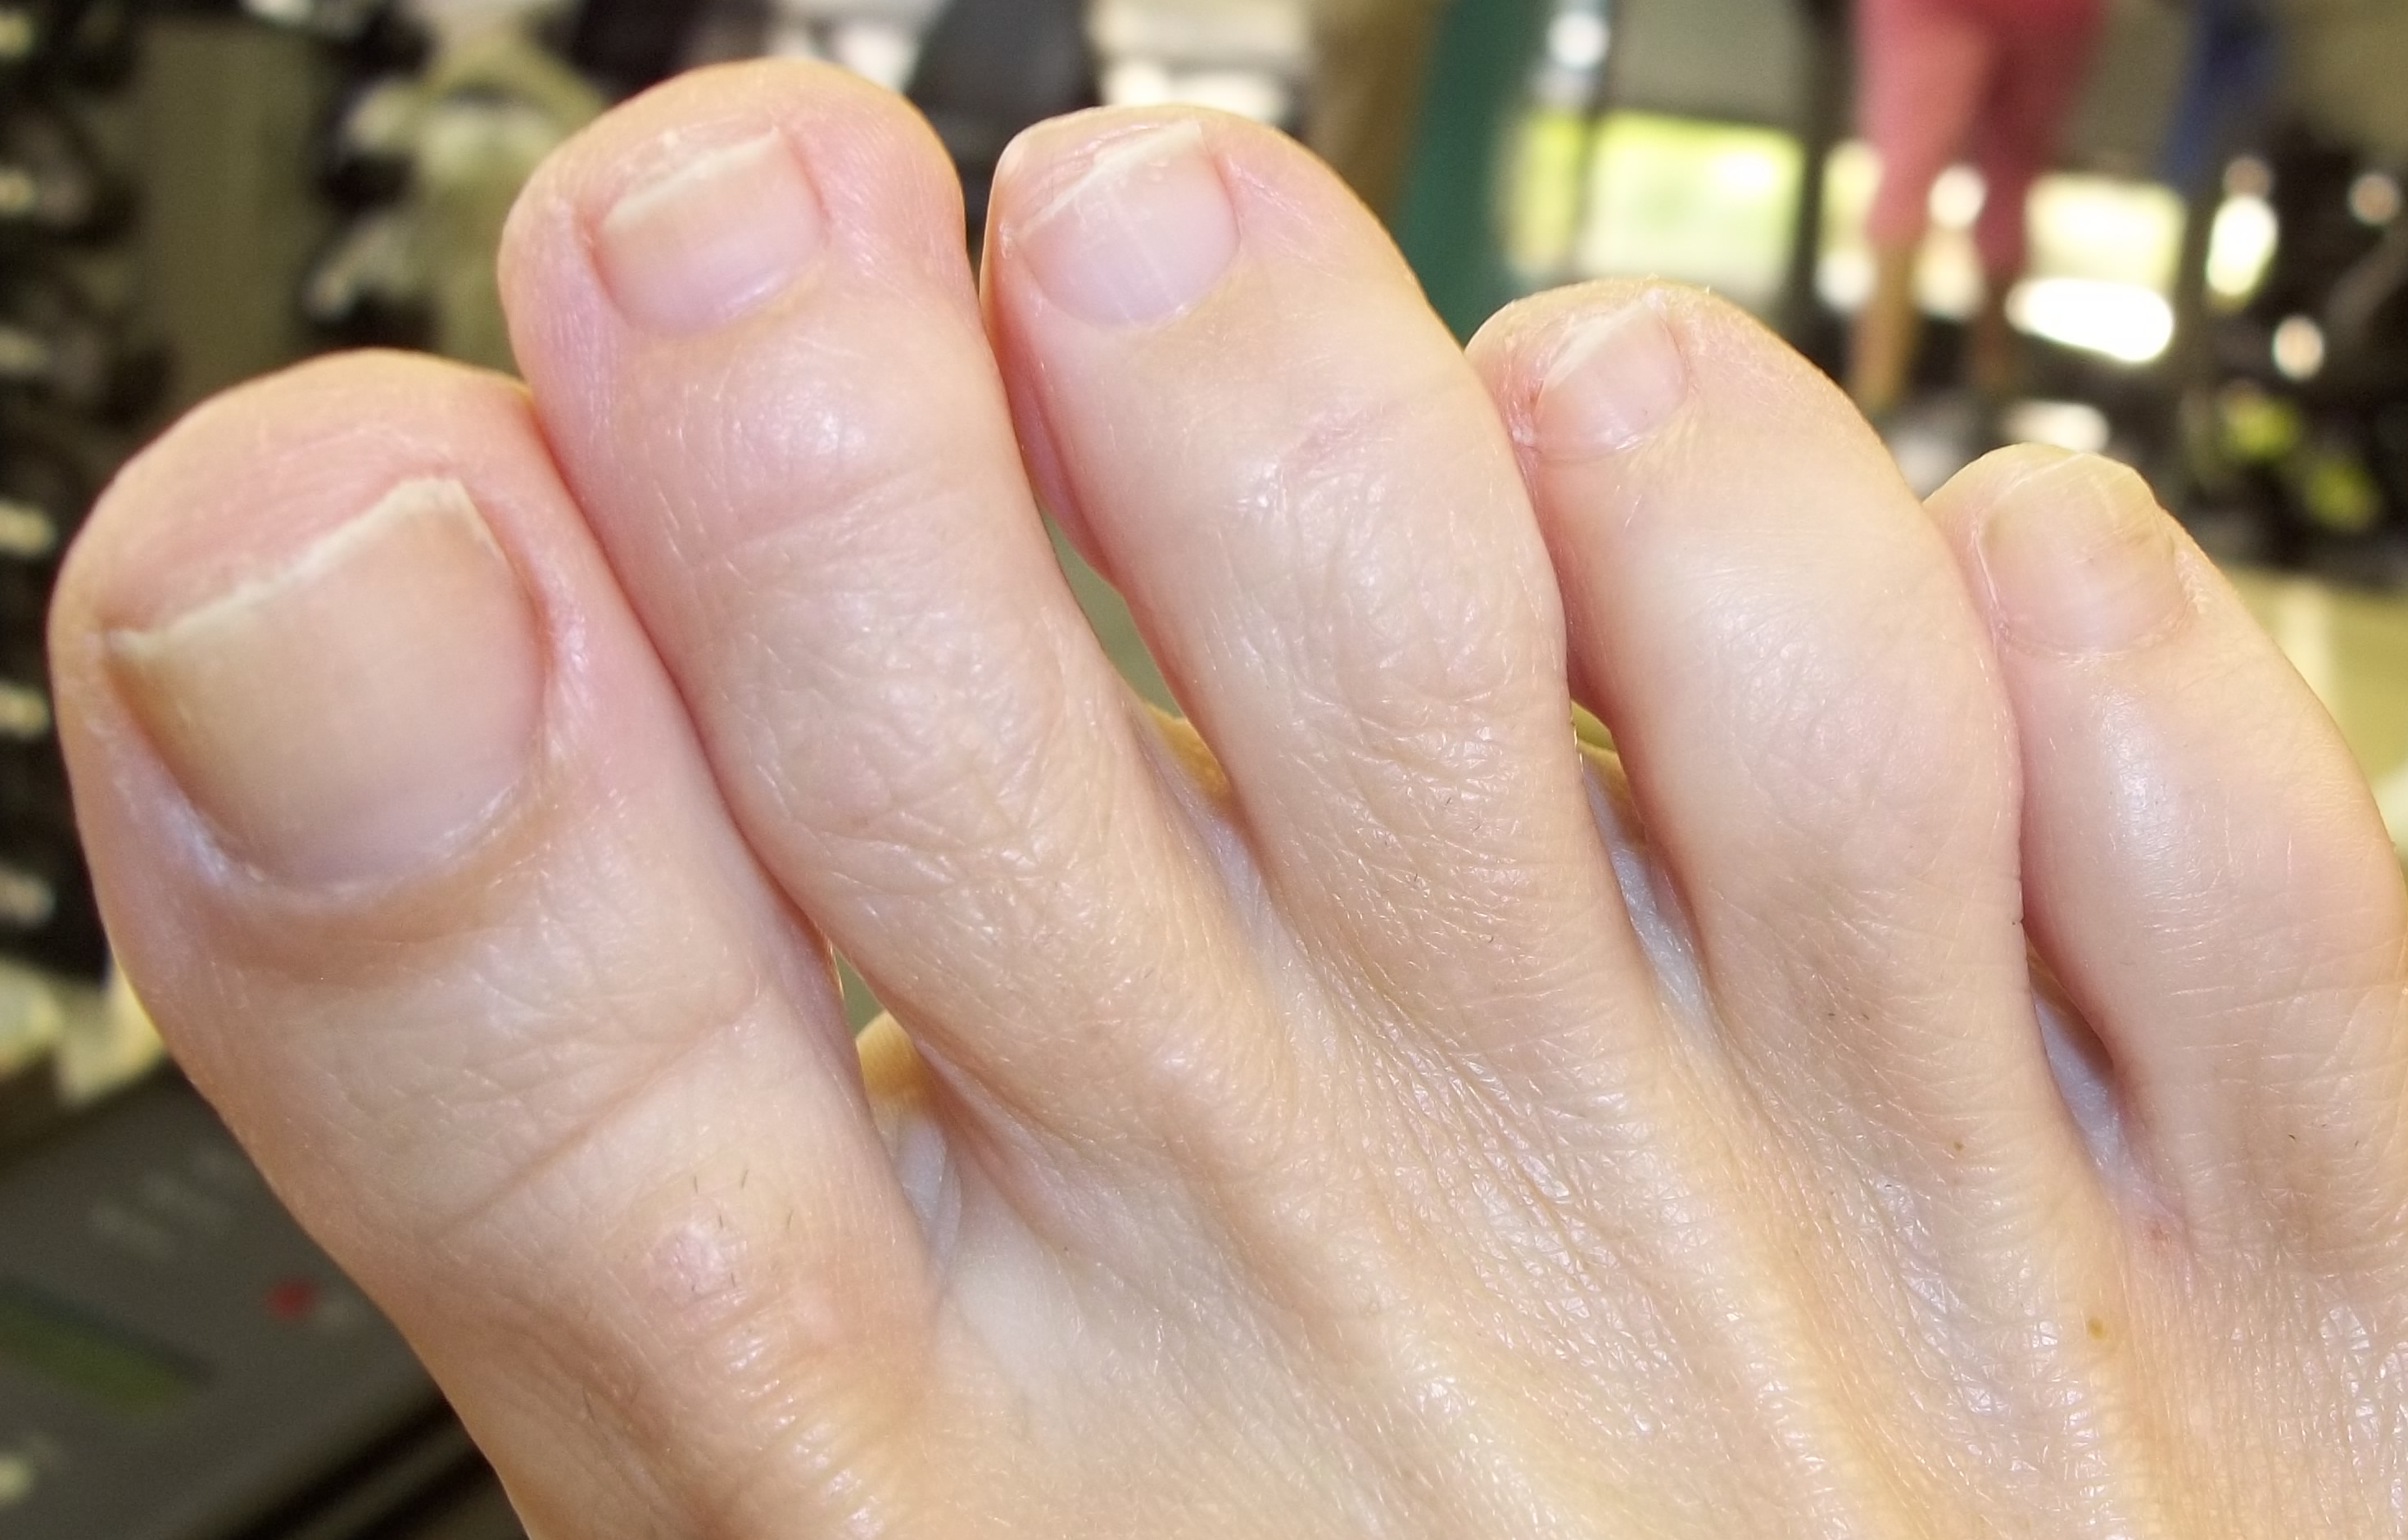 Toe Fungus After Cold Laser Therapy, Toes Look Much Better